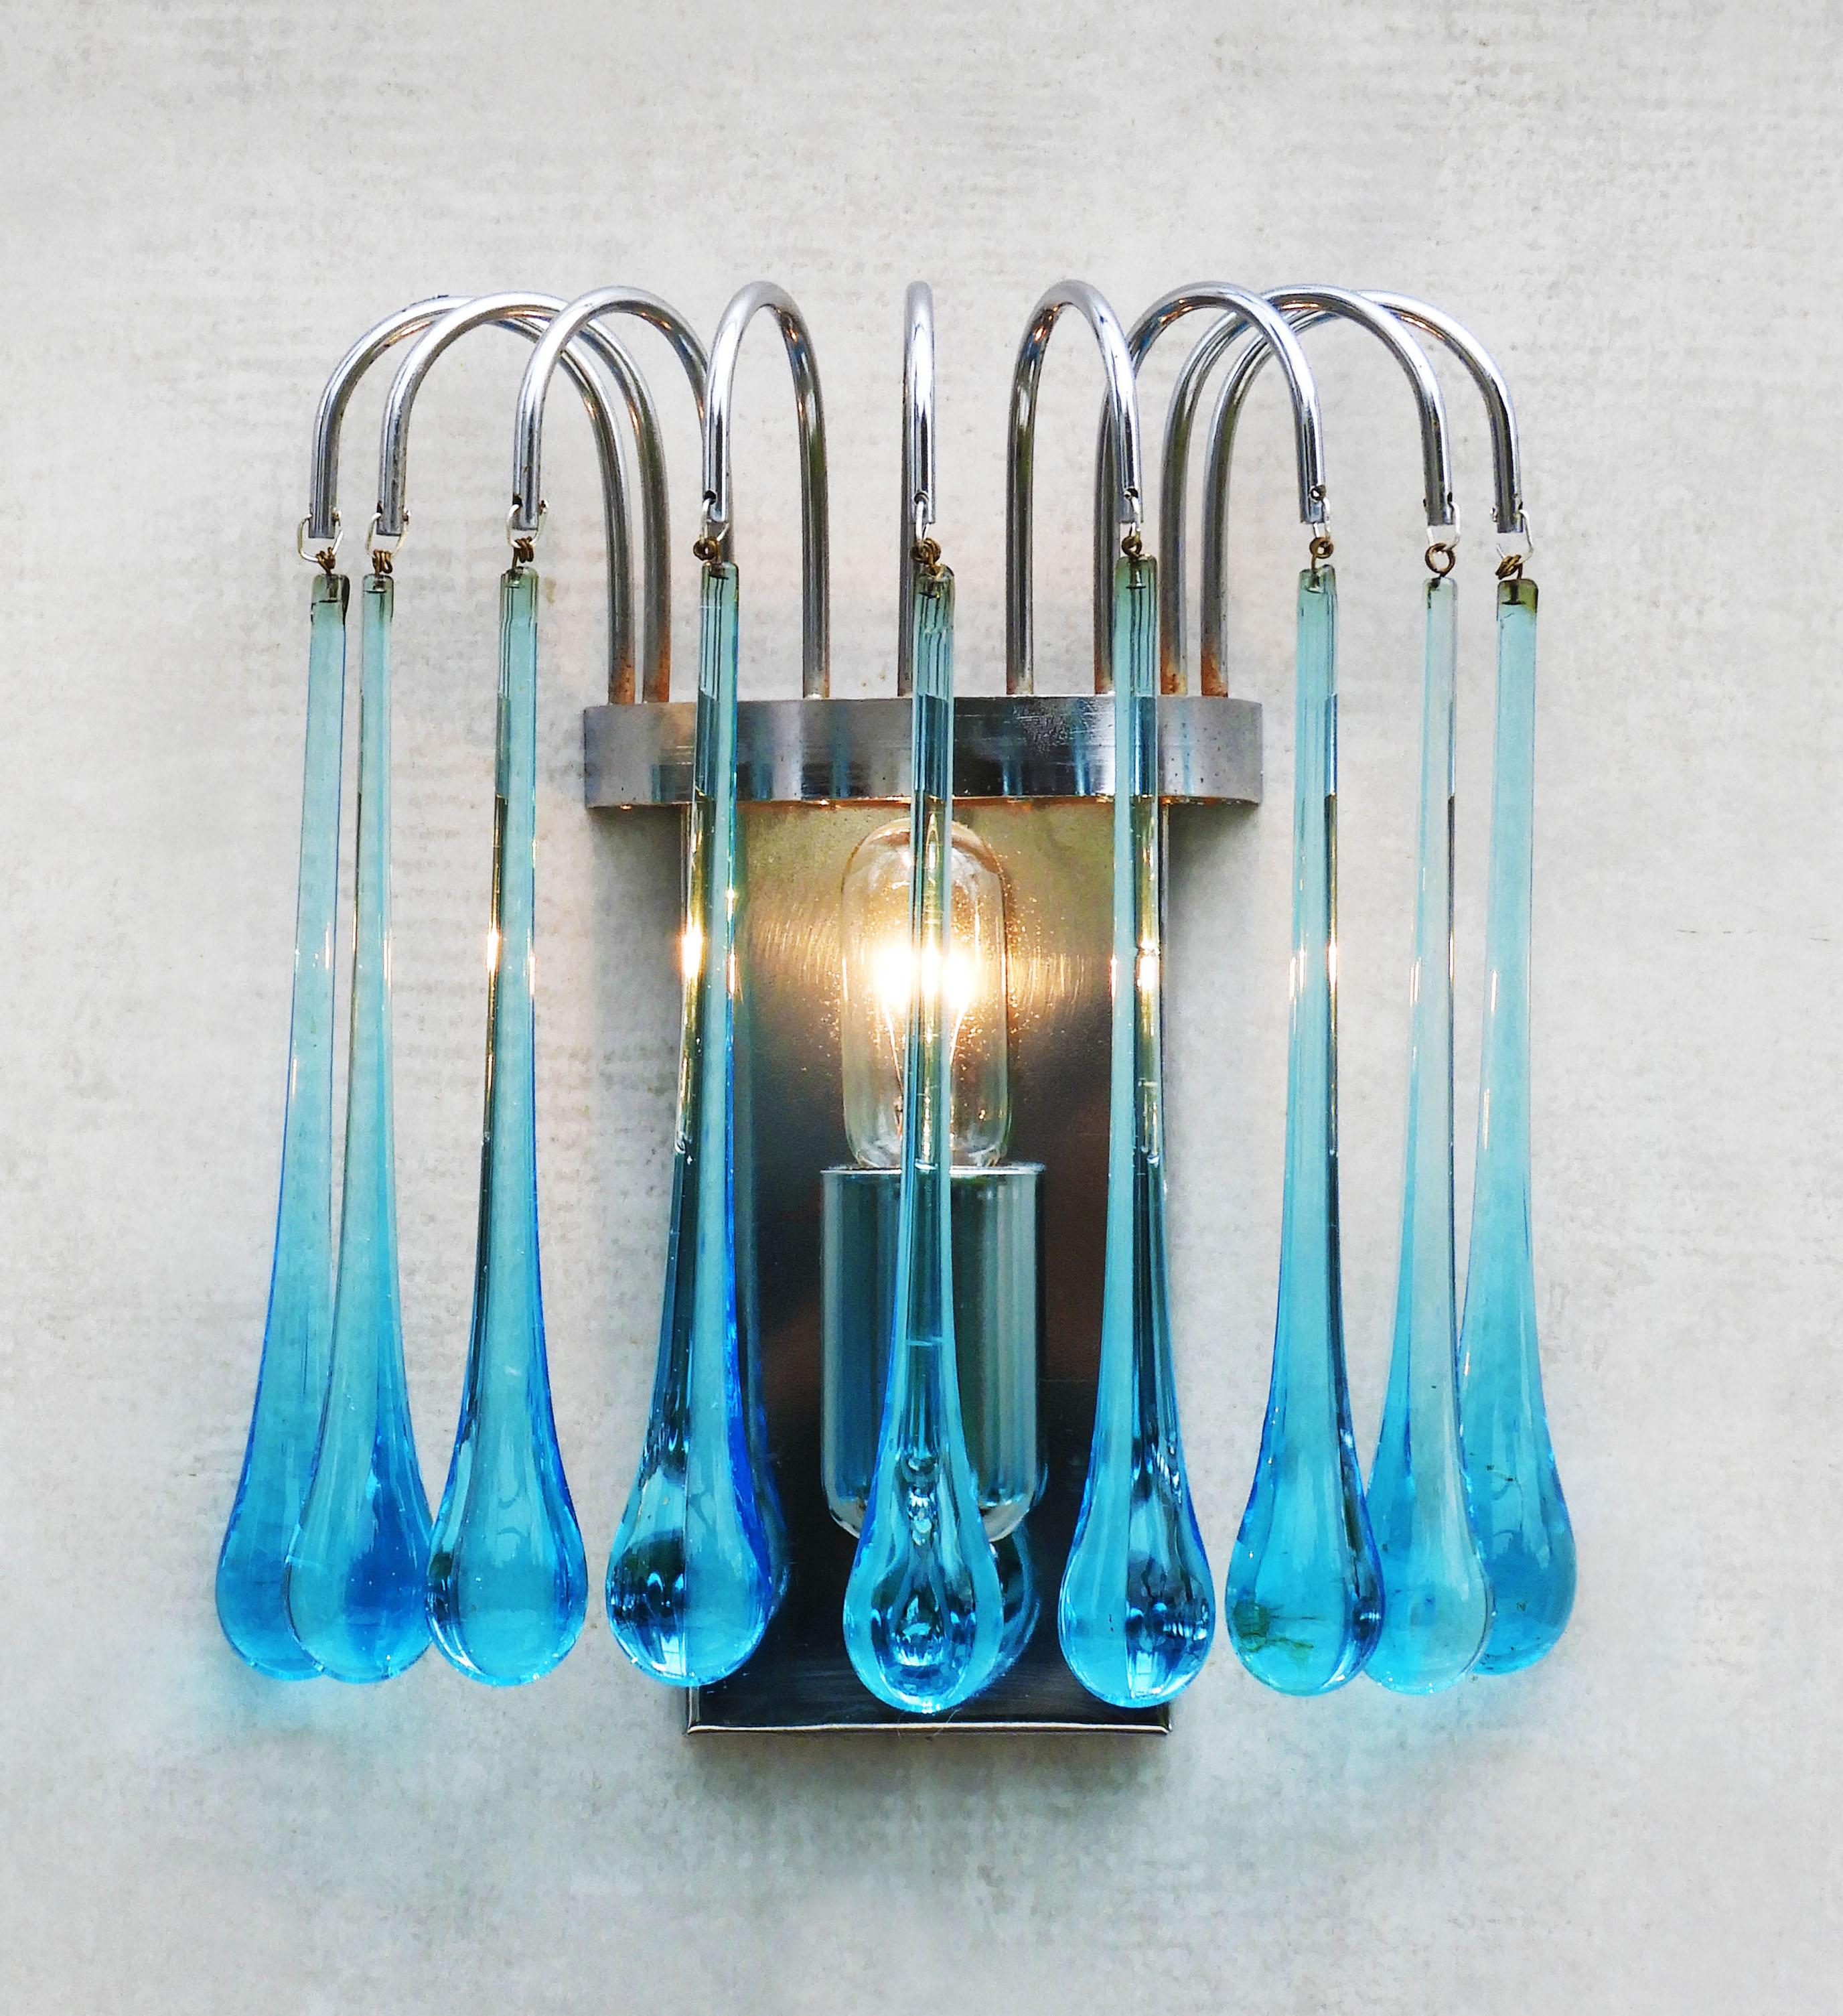 20th Century Pair of Waterfall Venini Style Wall Light Sconces Blue Murano Glass & Chrome 70s For Sale